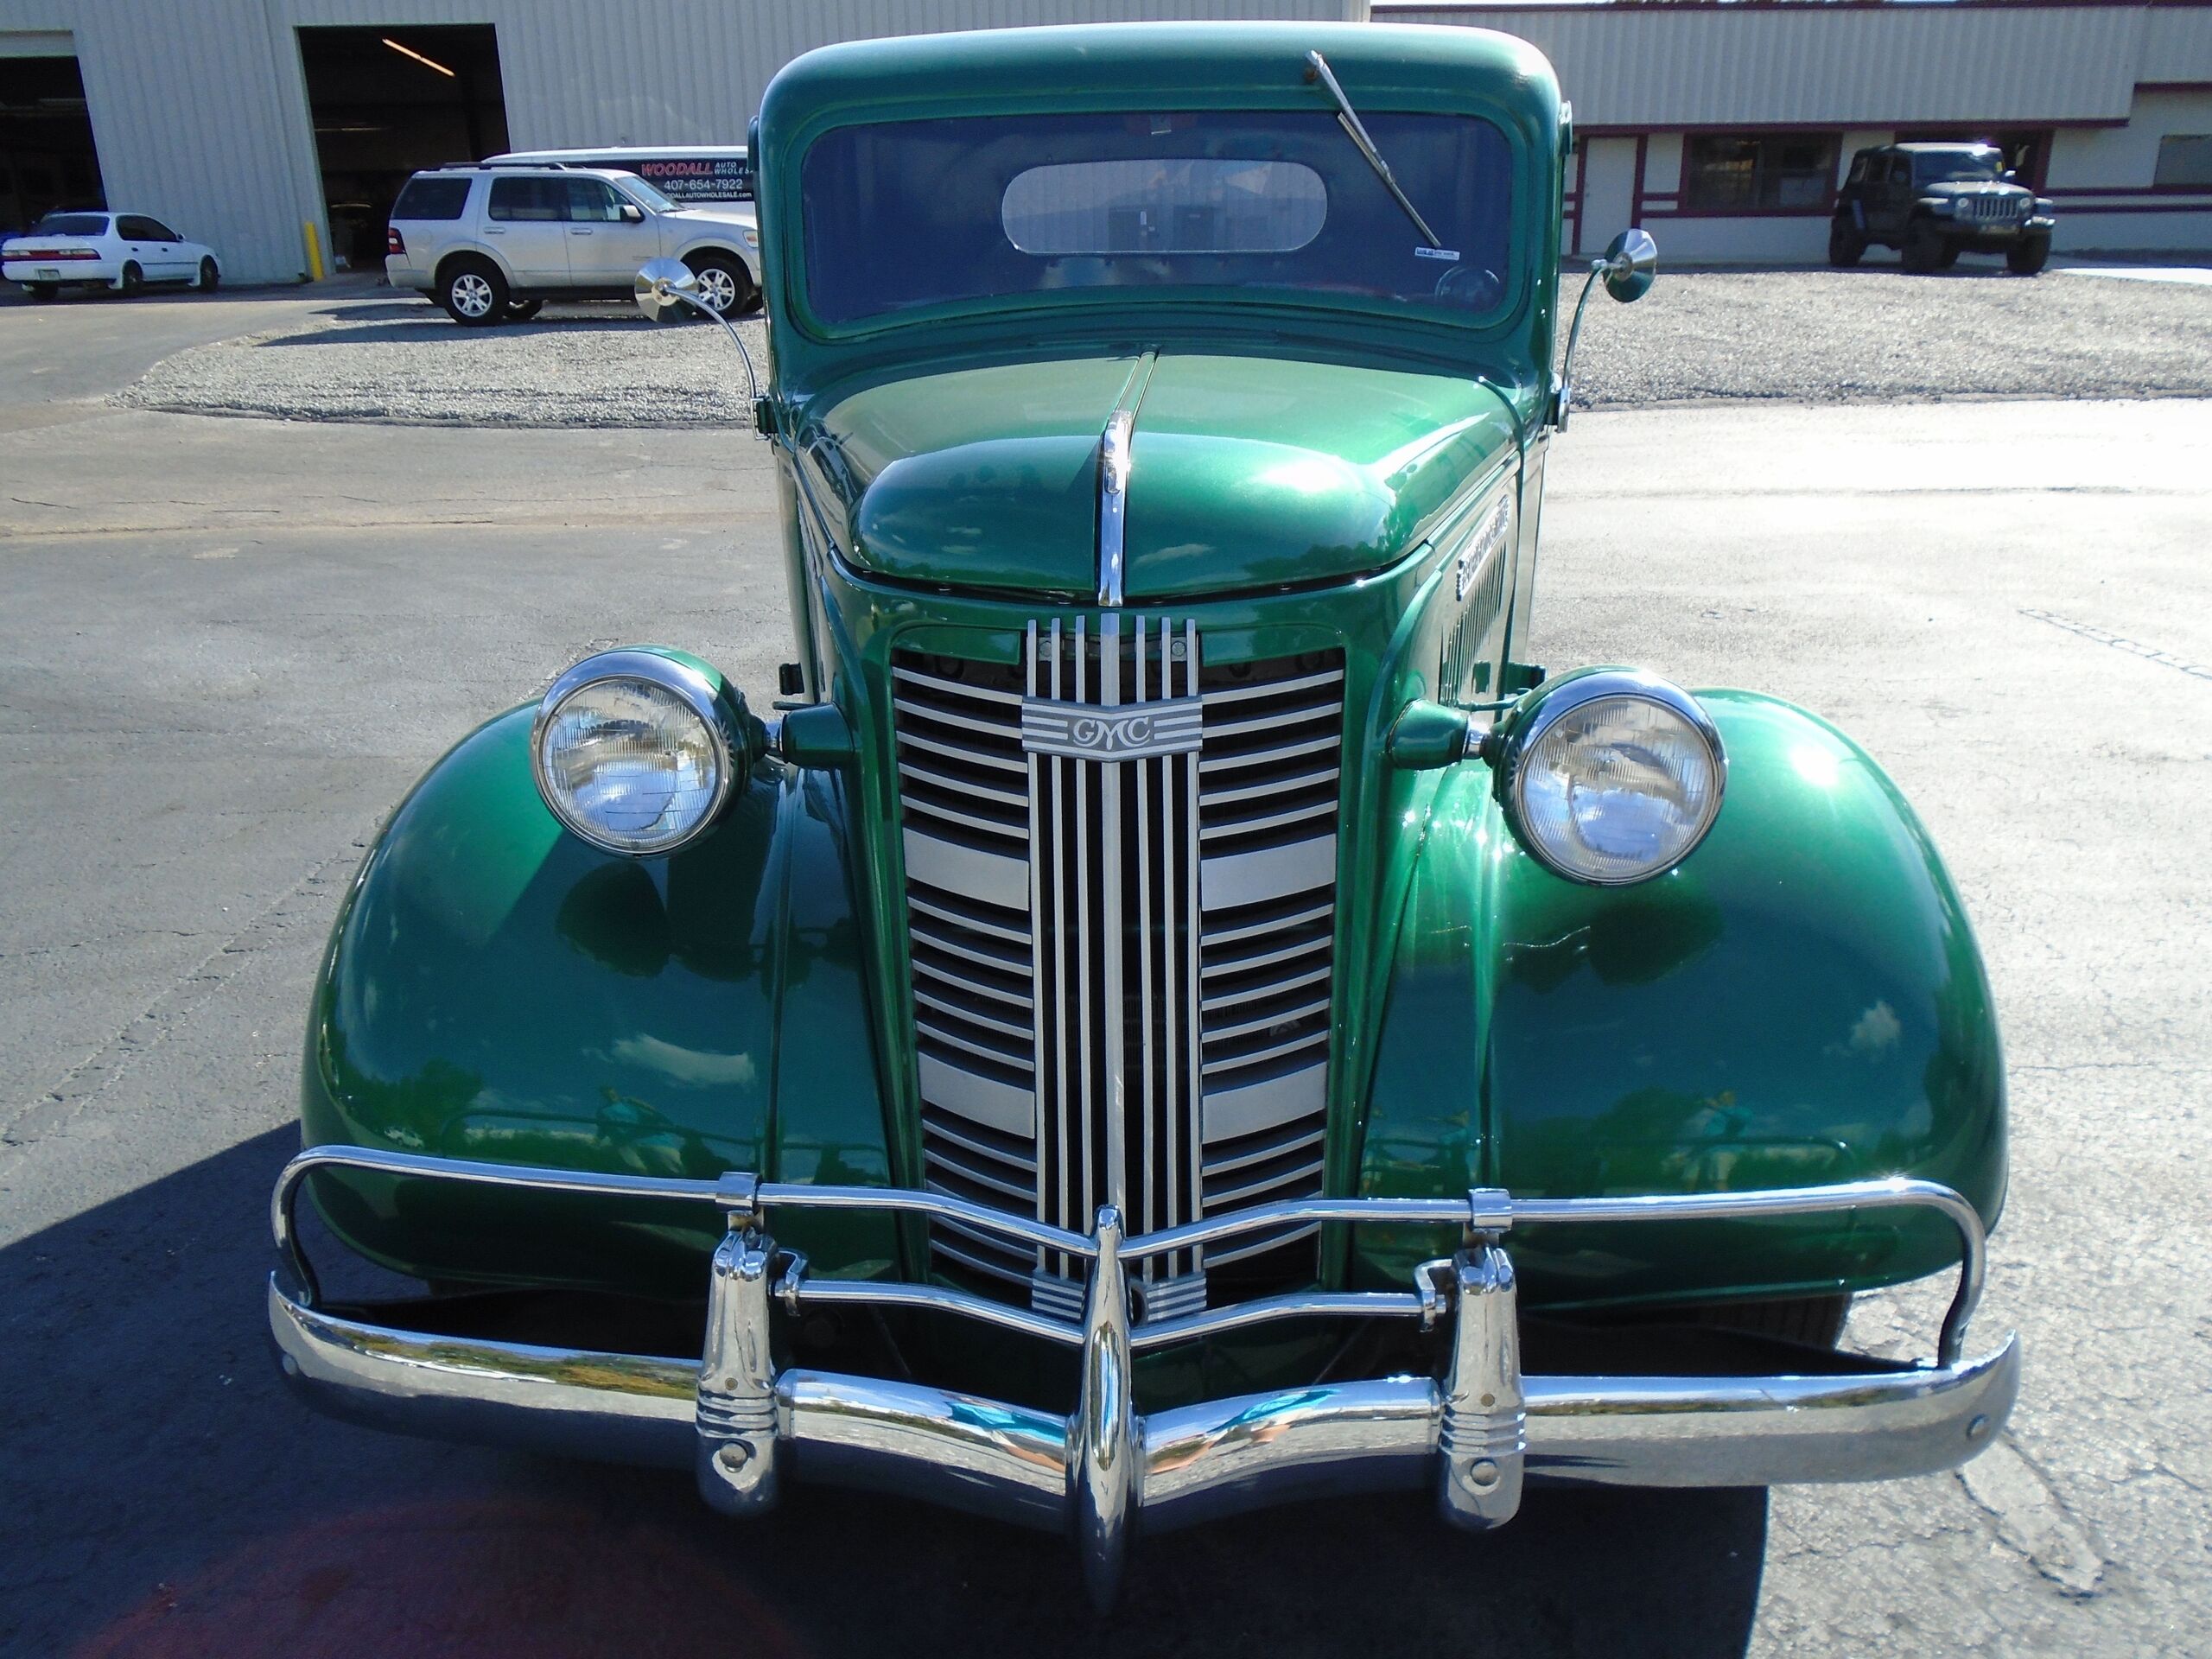 1937 GMC  Long bed  (Longbeds are rare) 2